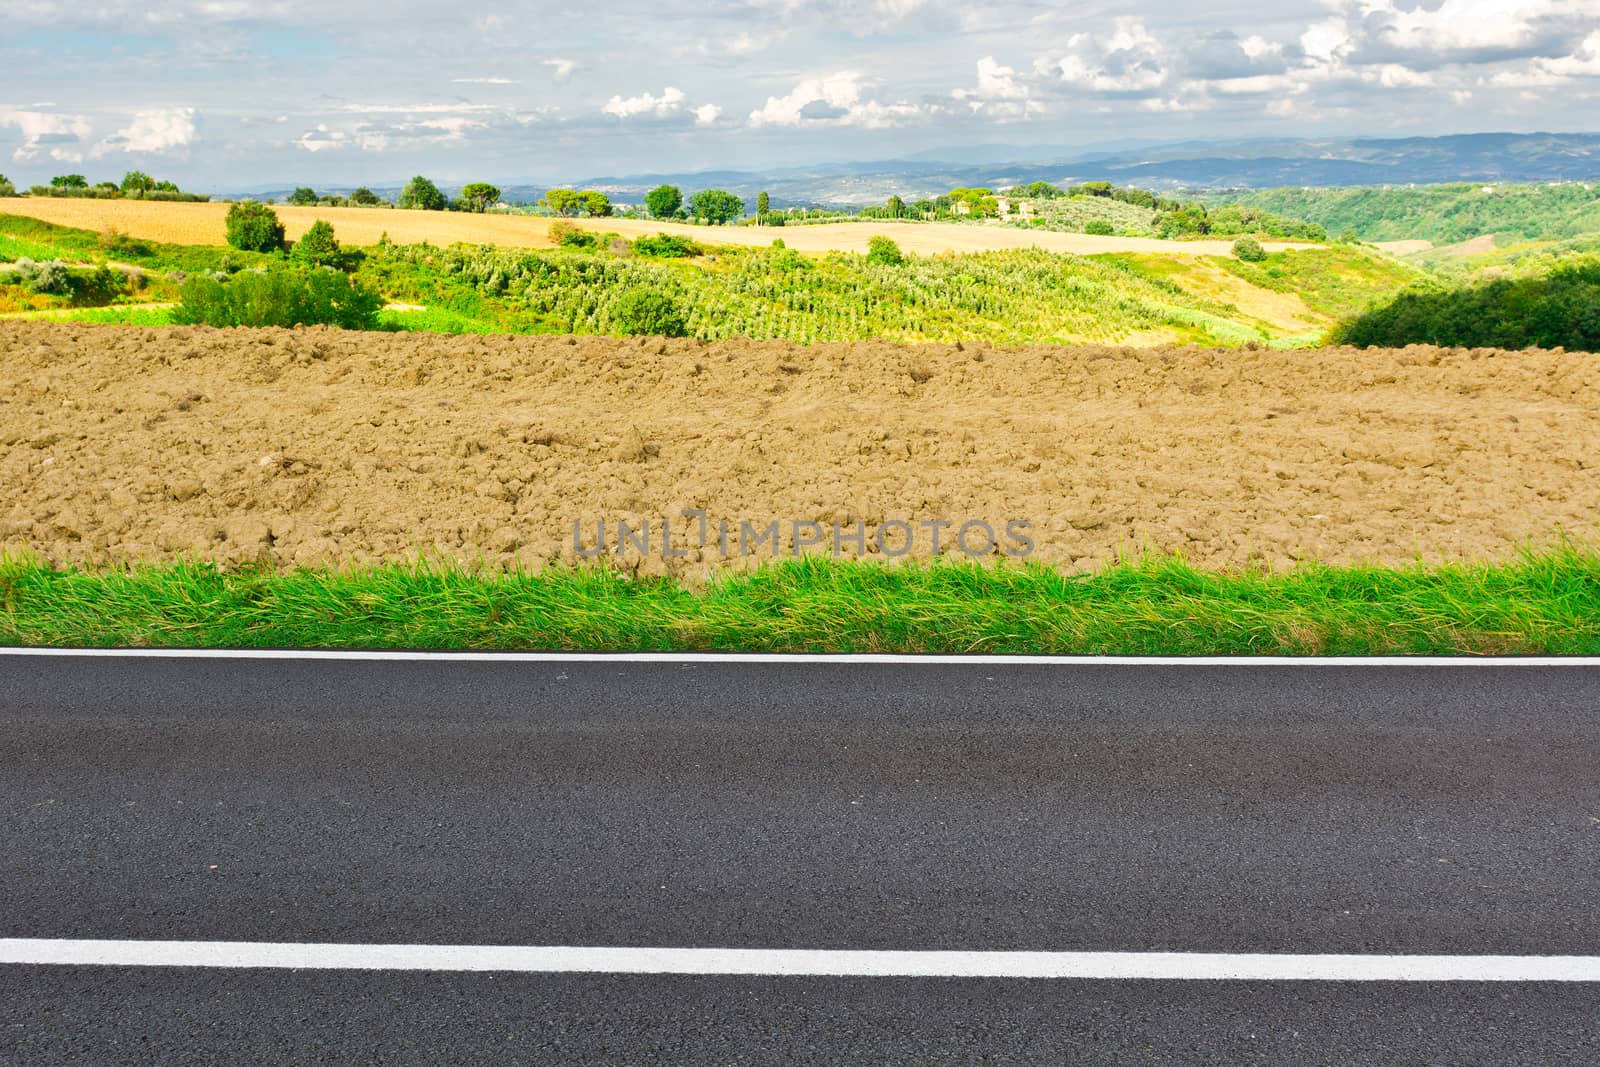 Asphalt Road between Autumn Plowed Fields in the Tuscany